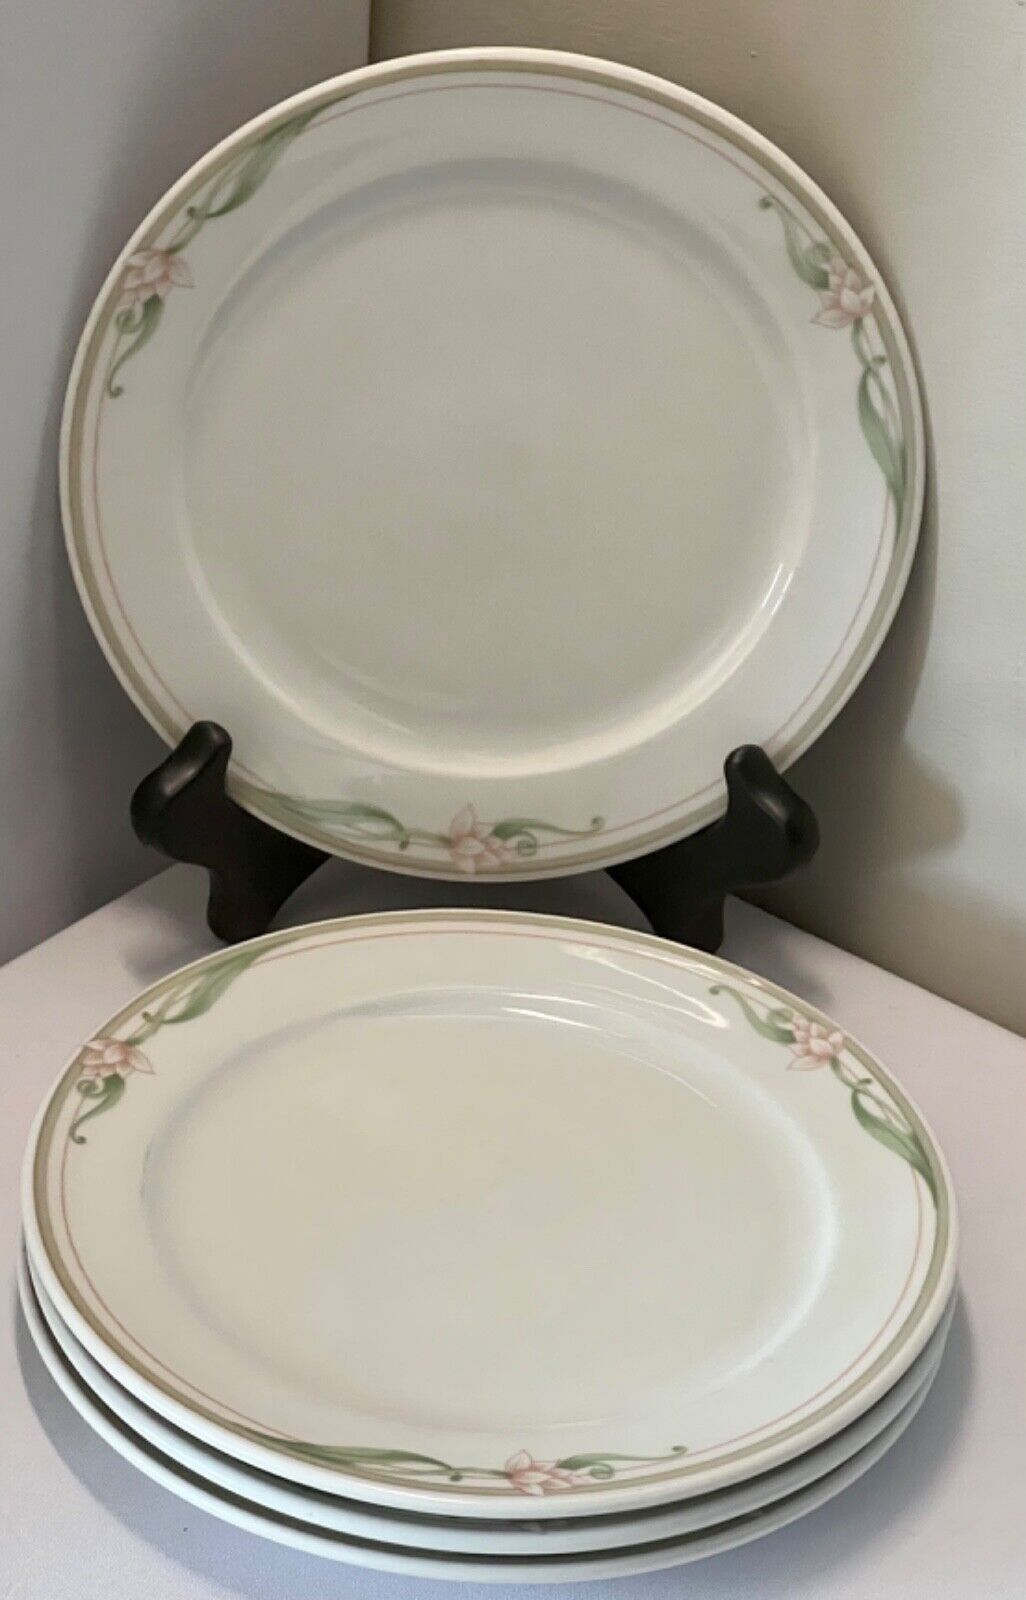 Set of 4 Vintage Royale Rego Bread Plates 6-1/4” in Excellent Used Condition